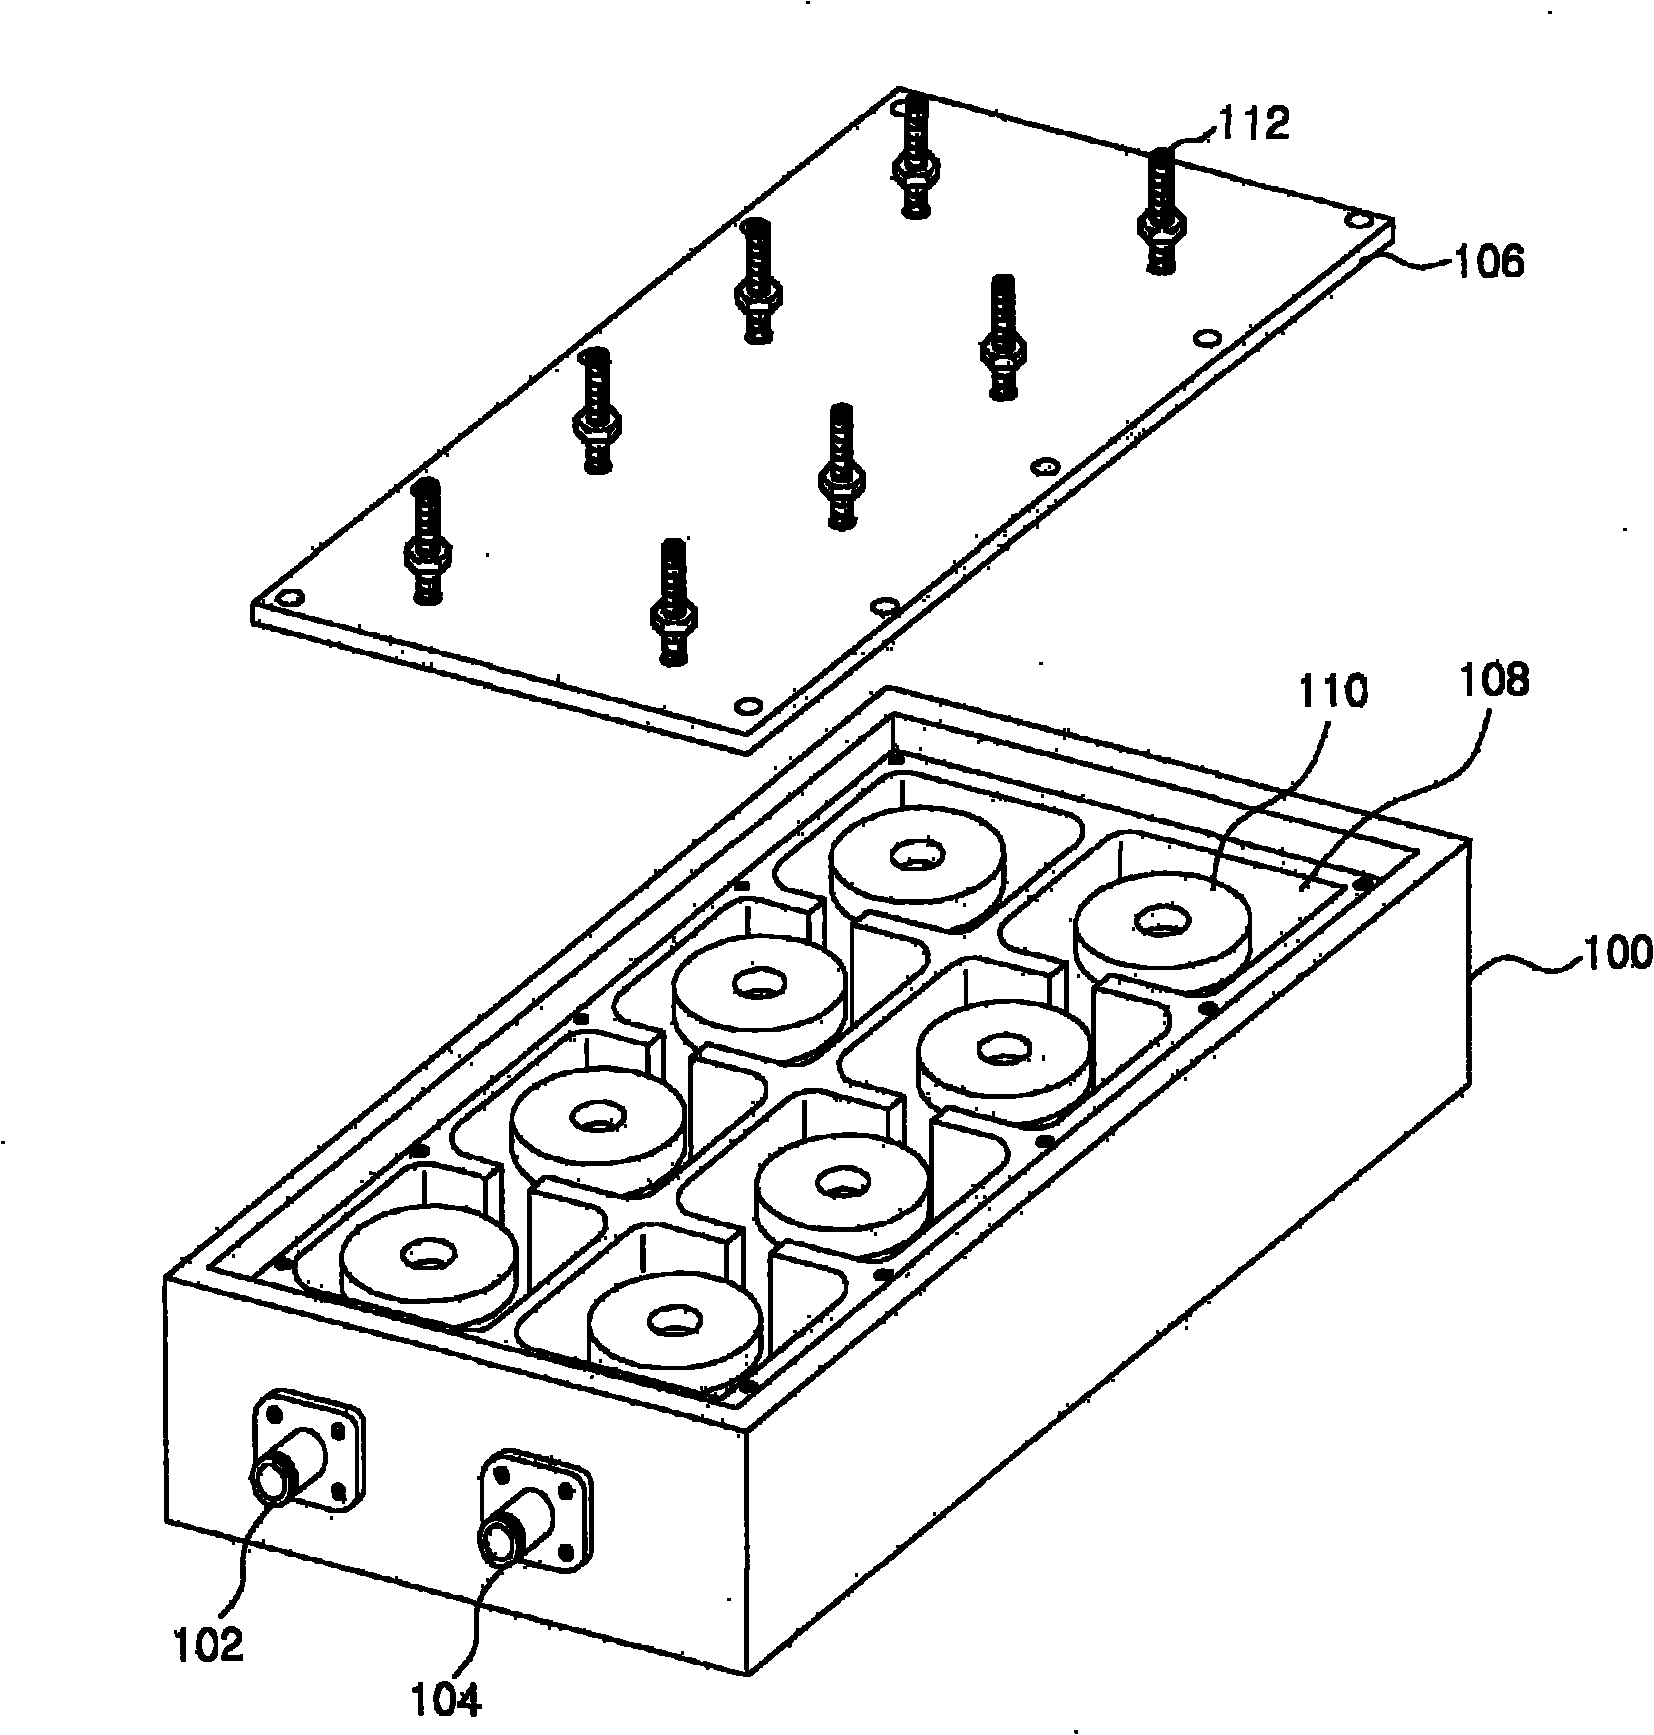 Frequency tuneable filter using a sliding system